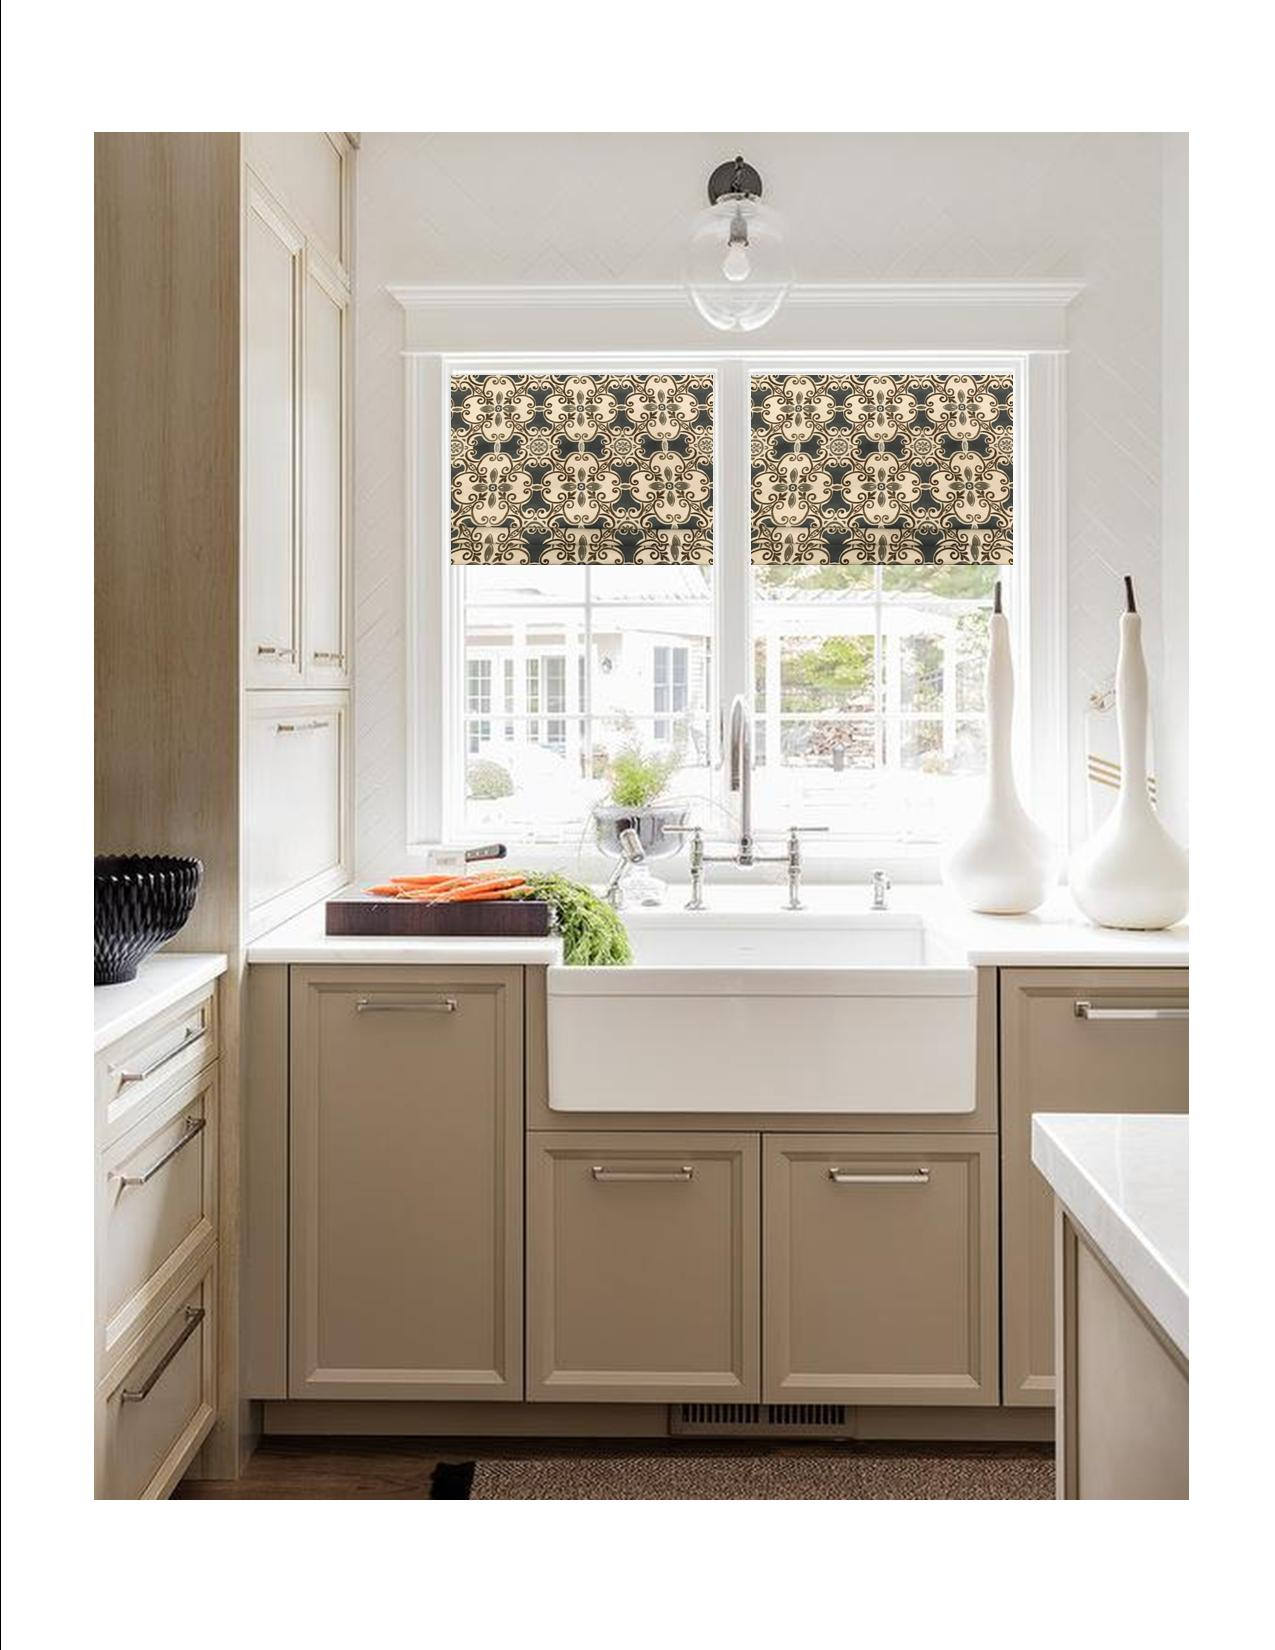 Faux Roman Shade Valance in Blue Spanish Tile Design with Grey and Brown Cotton Linen, Fully Lined, Custom Made, Farmhouse Kitchen Valance